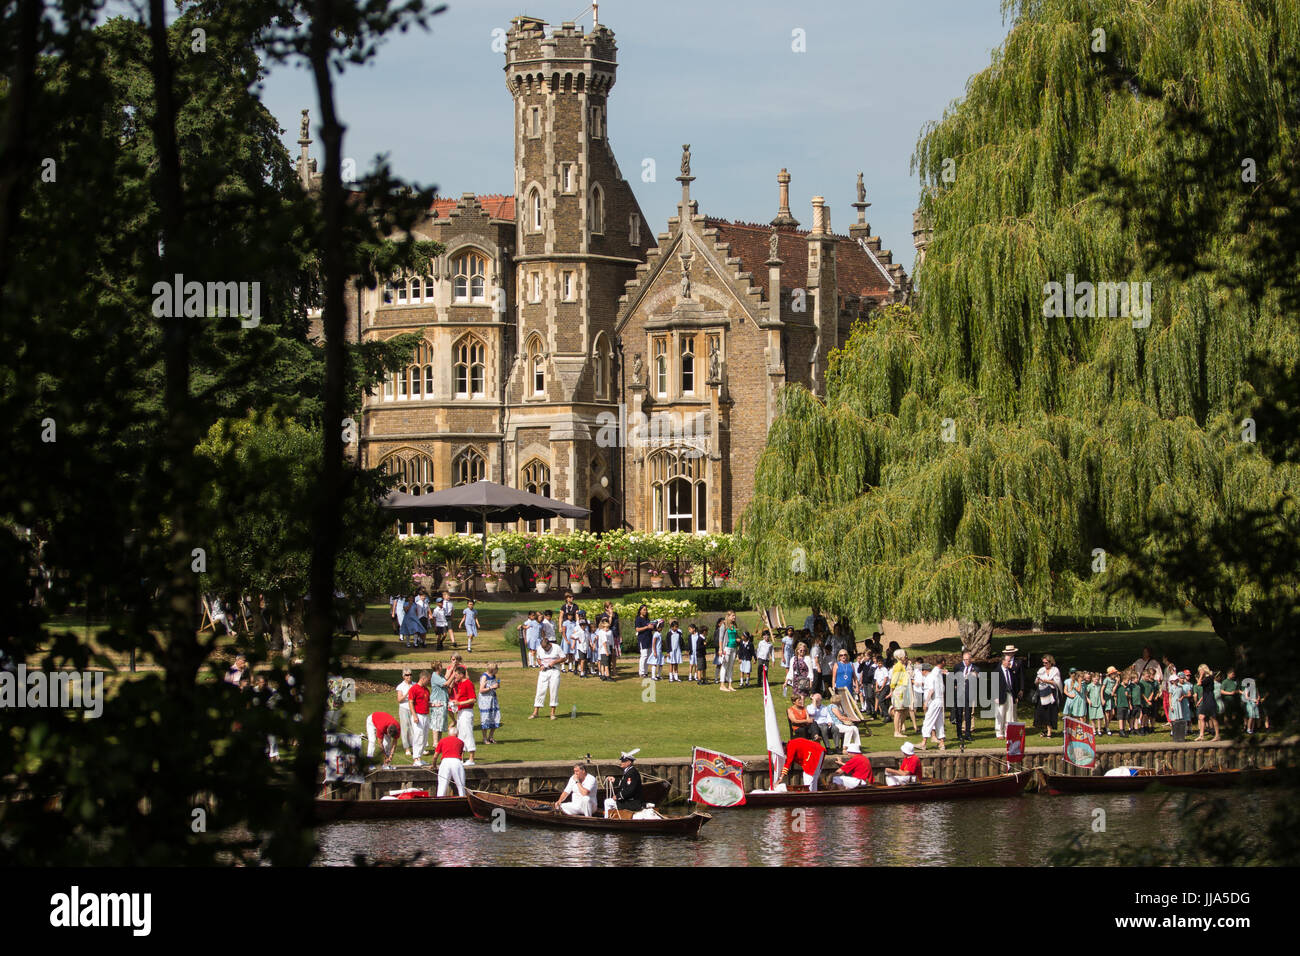 Oakley Court, UK. 18th July, 2017. Swan Uppers arrive at Oakley Court hotel on the second day of the Swan Upping census for a demonstration to local schoolchildren. Swan Upping is an annual five-day ceremonial swan census requiring the gathering, marking and releasing of all cygnets, or mute swans, on the River Thames. It dates back more than 800 years, to when the Crown claimed ownership of all mute swans. The second day of the census takes place between Windsor Bridge and Marlow Lock. Credit: Mark Kerrison/Alamy Live News Stock Photo